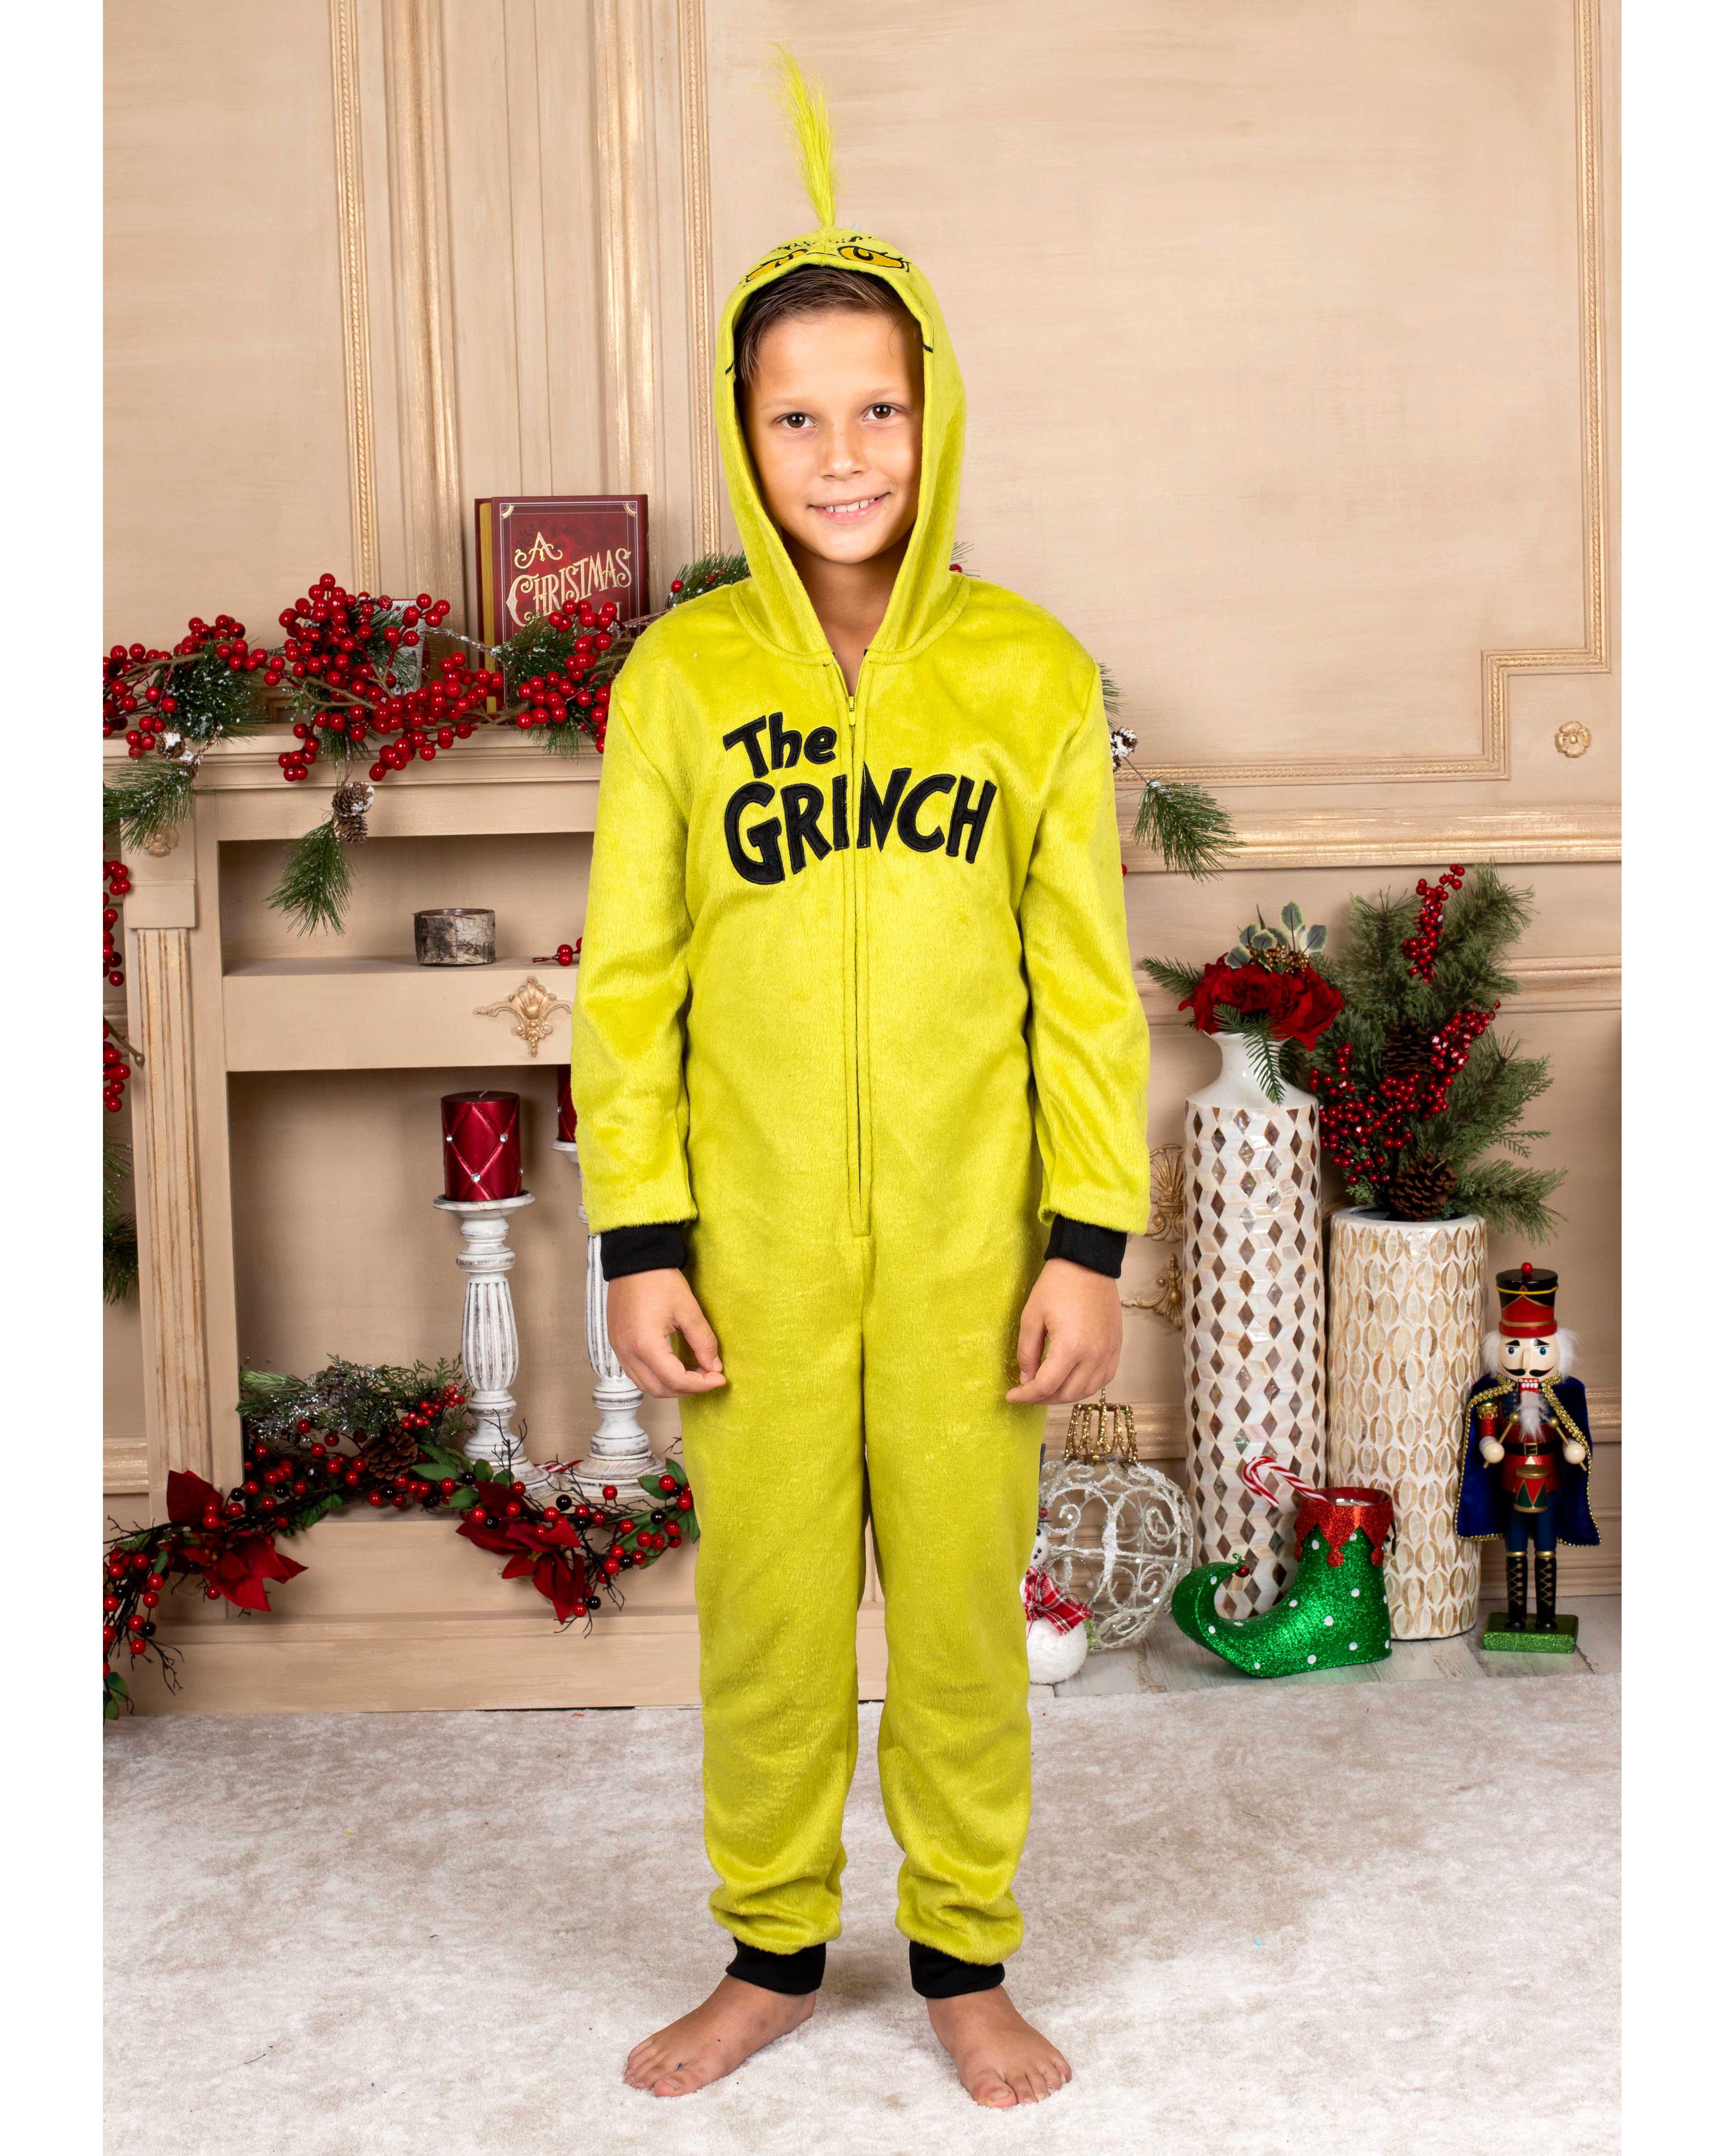 Seuss The Grinch Matching Family Costume Pajama Union Suit For Adults Kids Toddlers Dr 